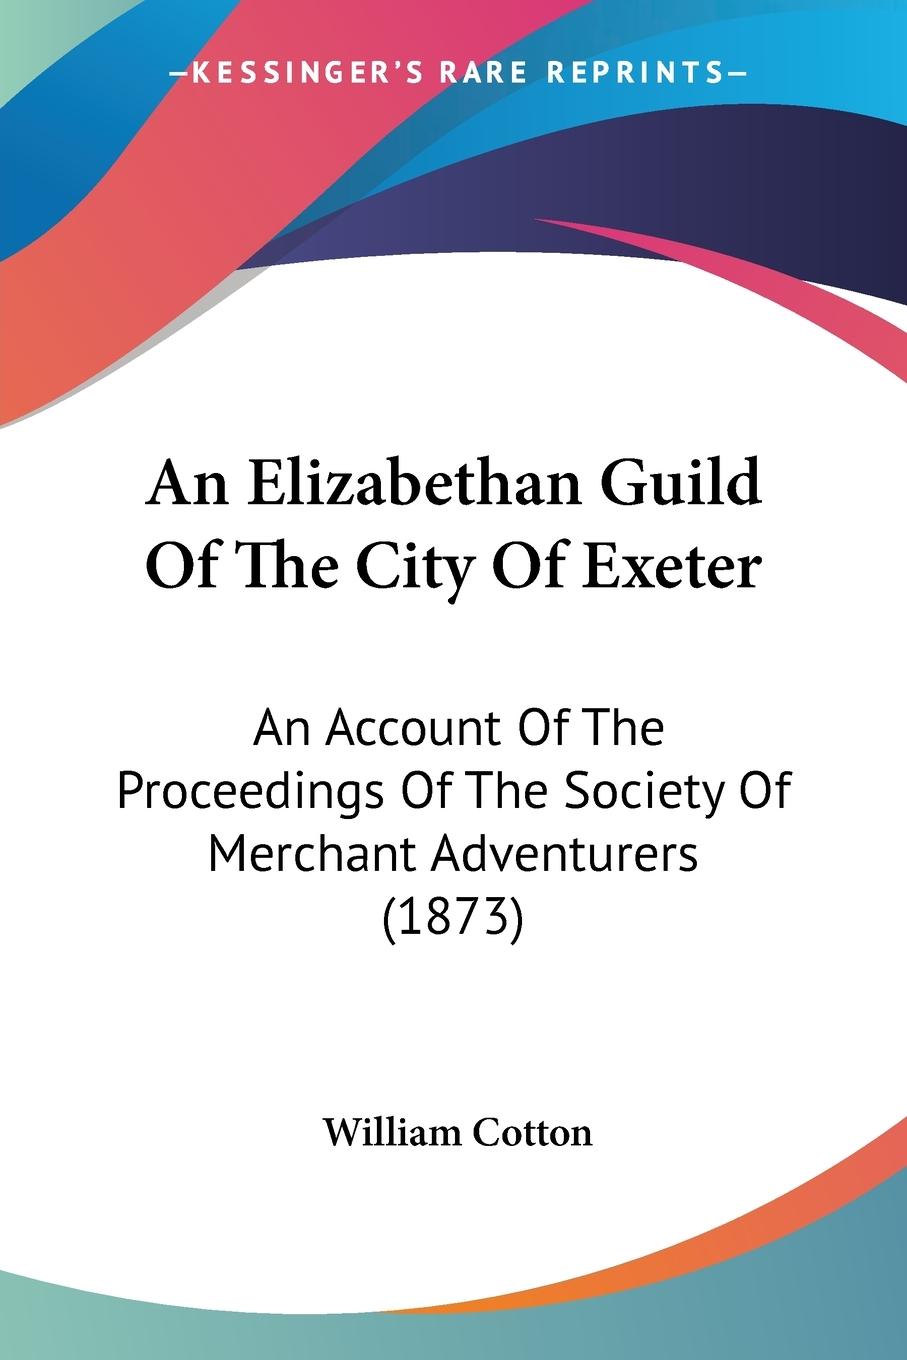 An Elizabethan Guild Of The City Of Exeter - Cotton, William